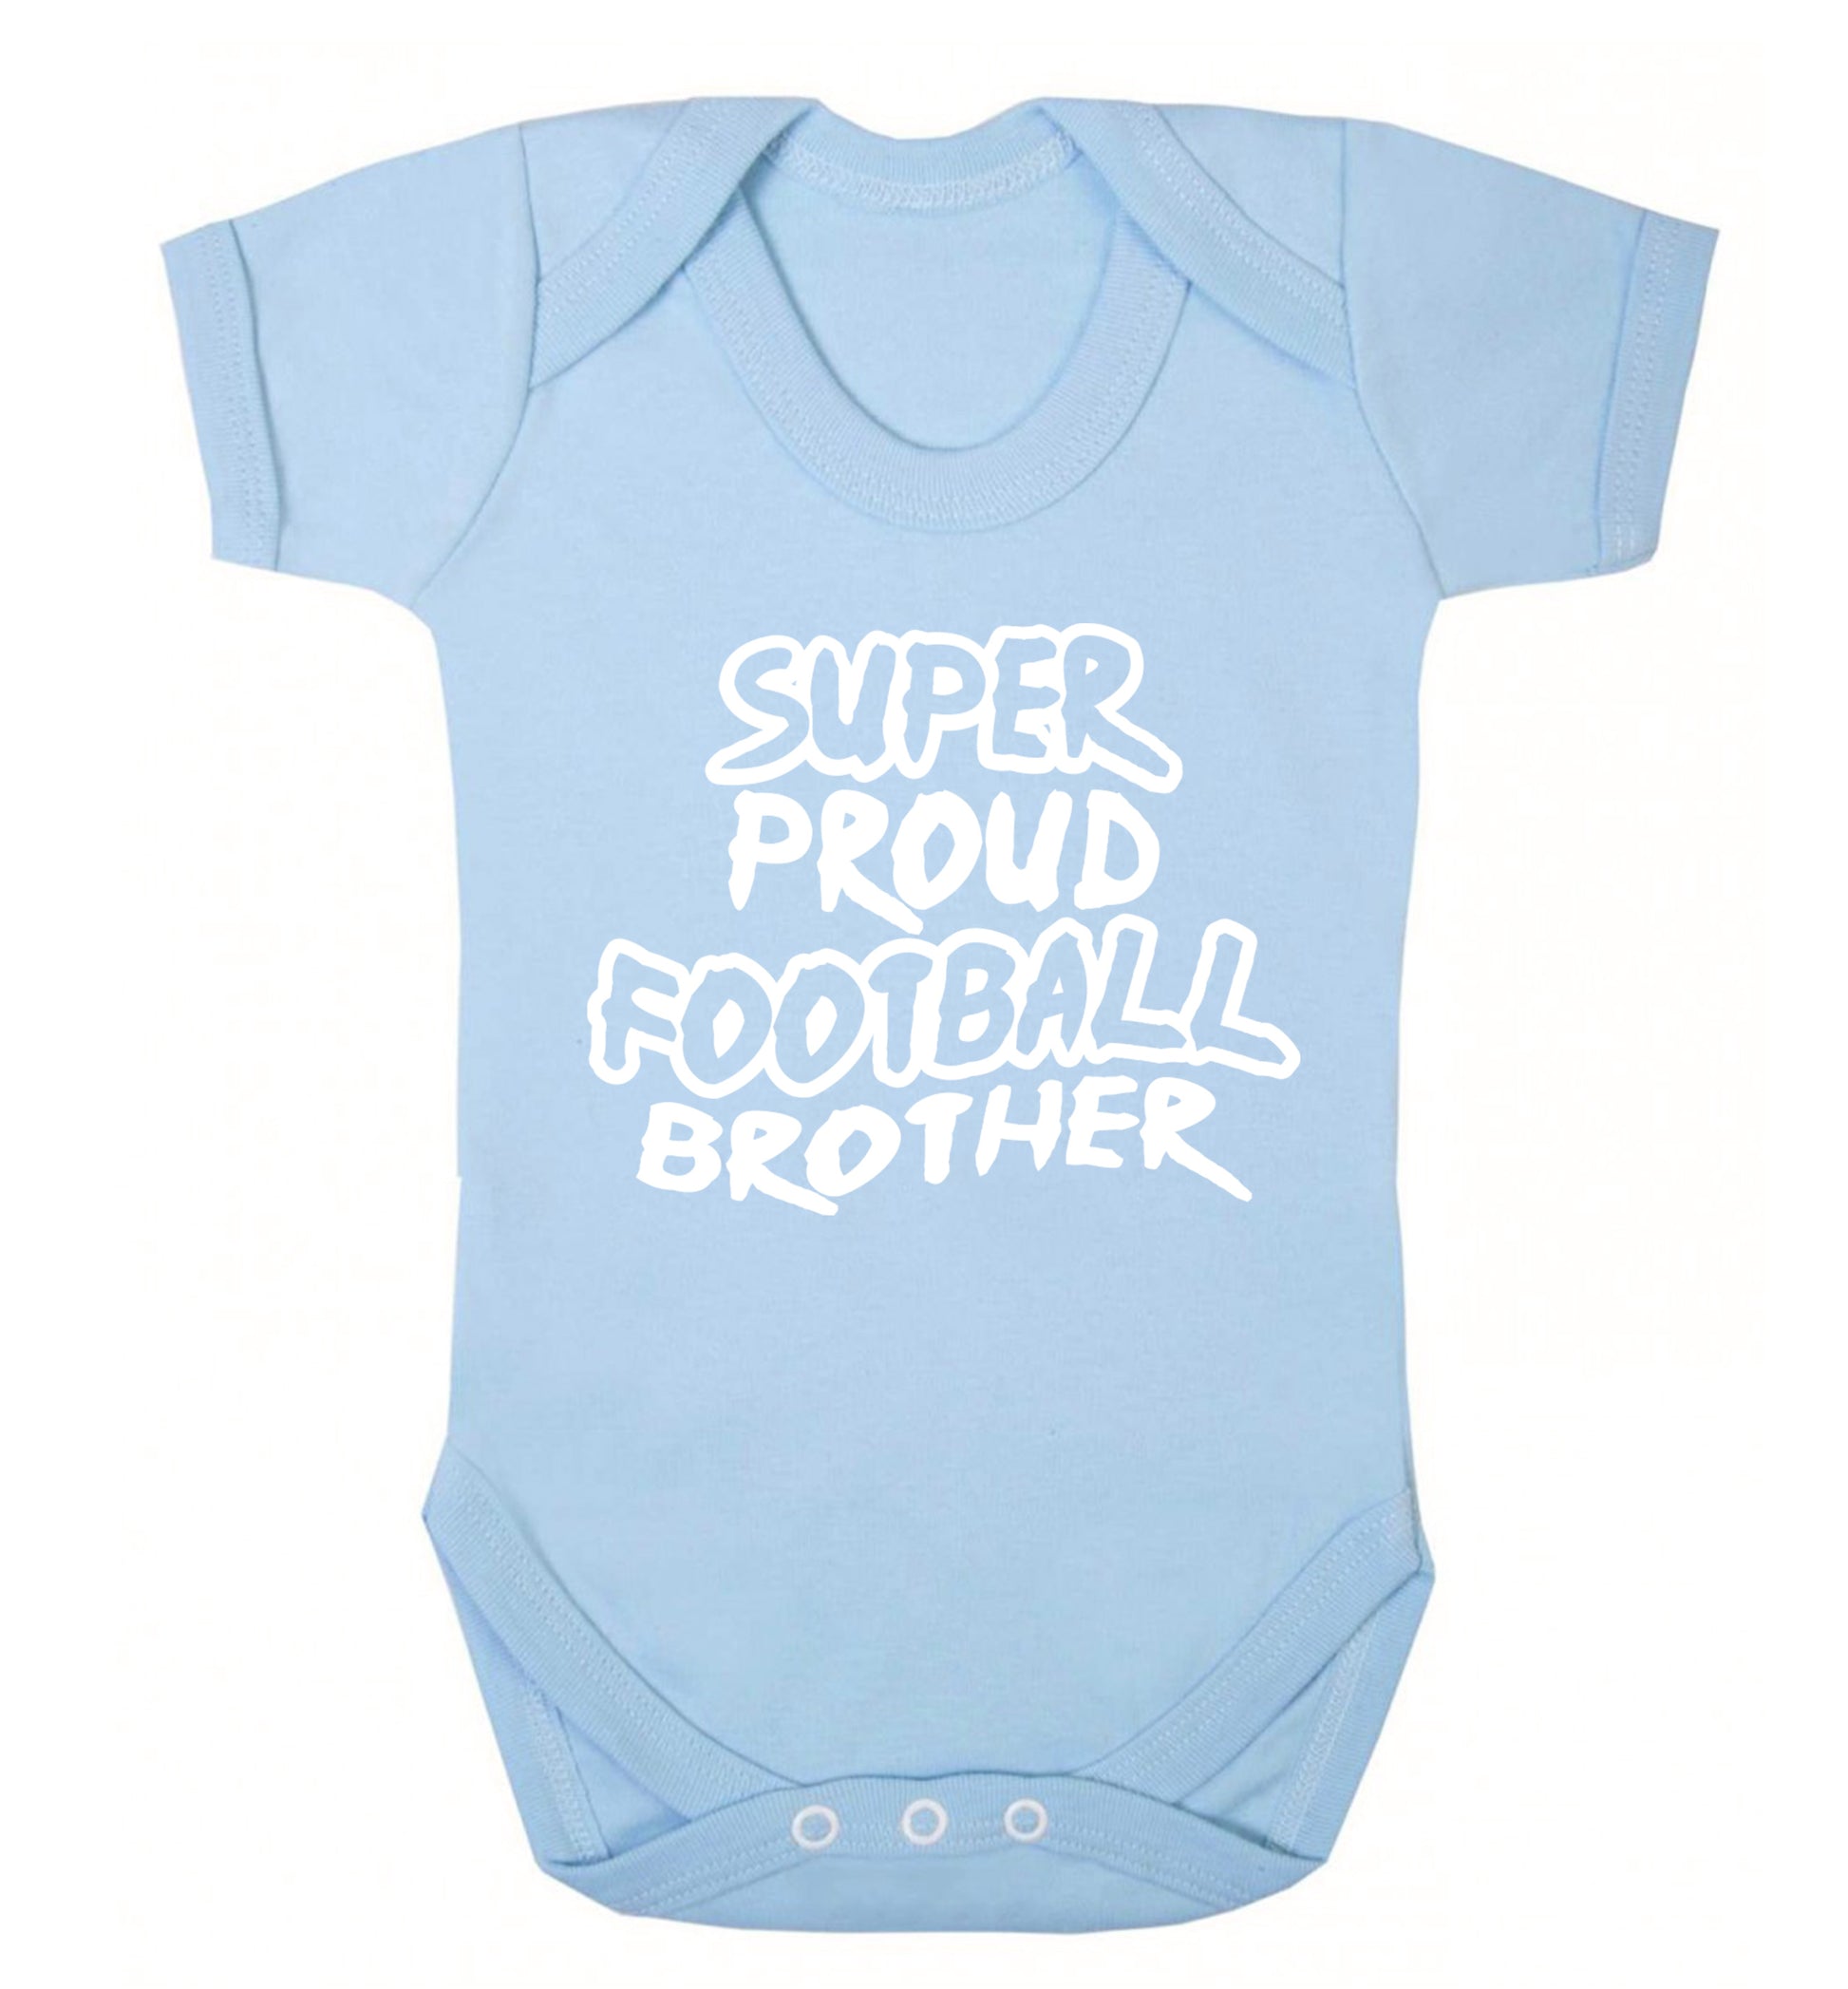 Super proud football brother Baby Vest pale blue 18-24 months